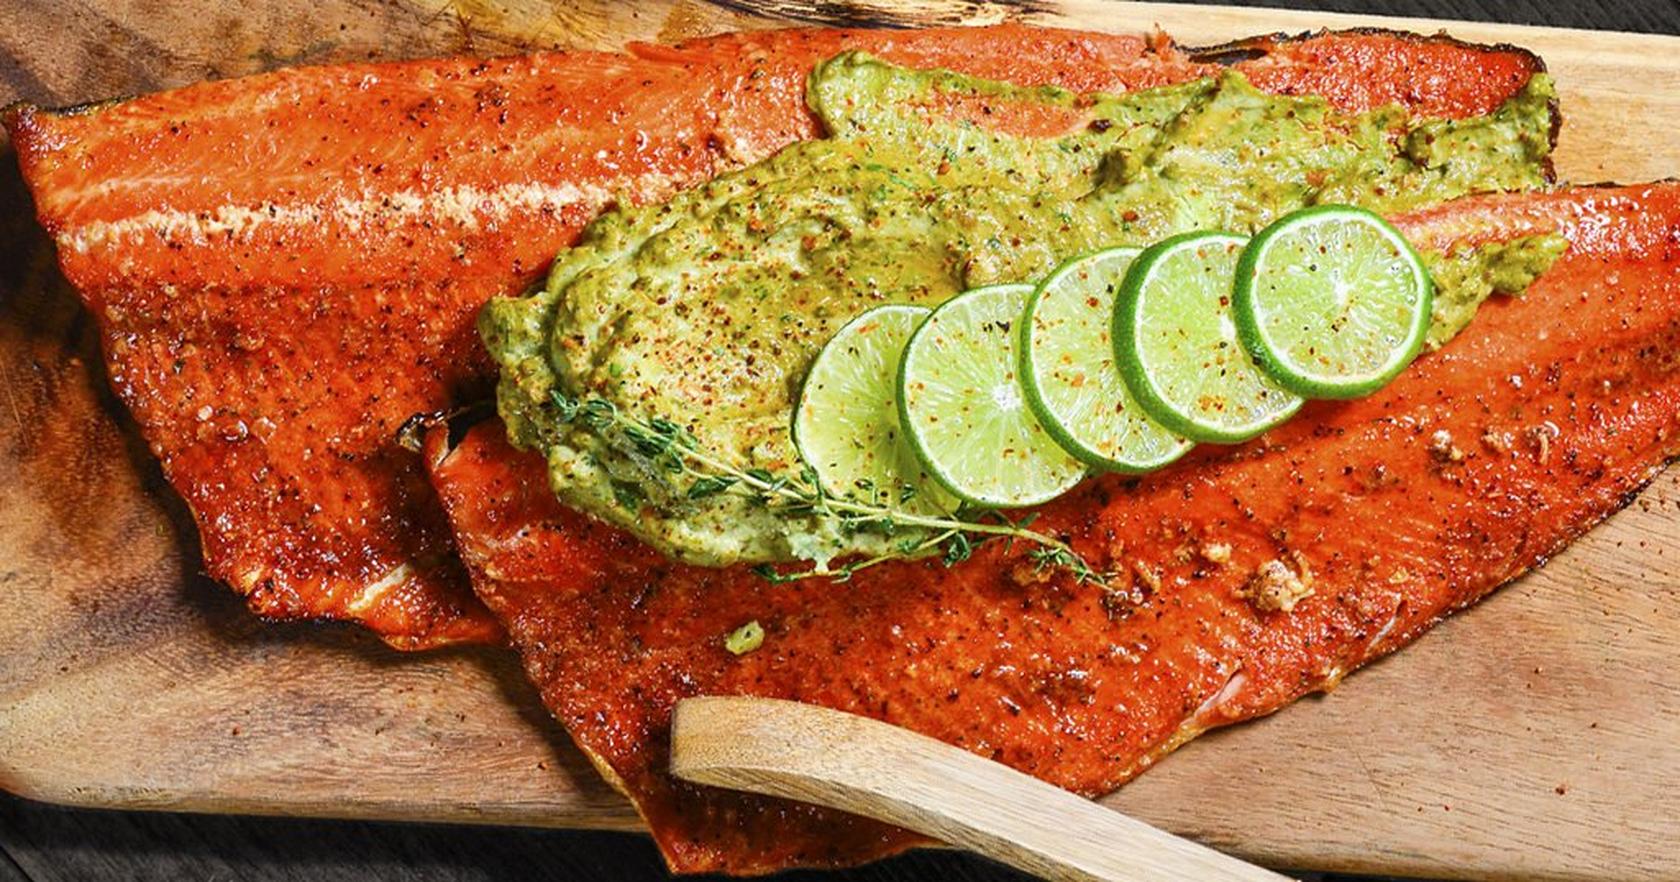 34 Best Salmon Recipes: Smoked & Grilled